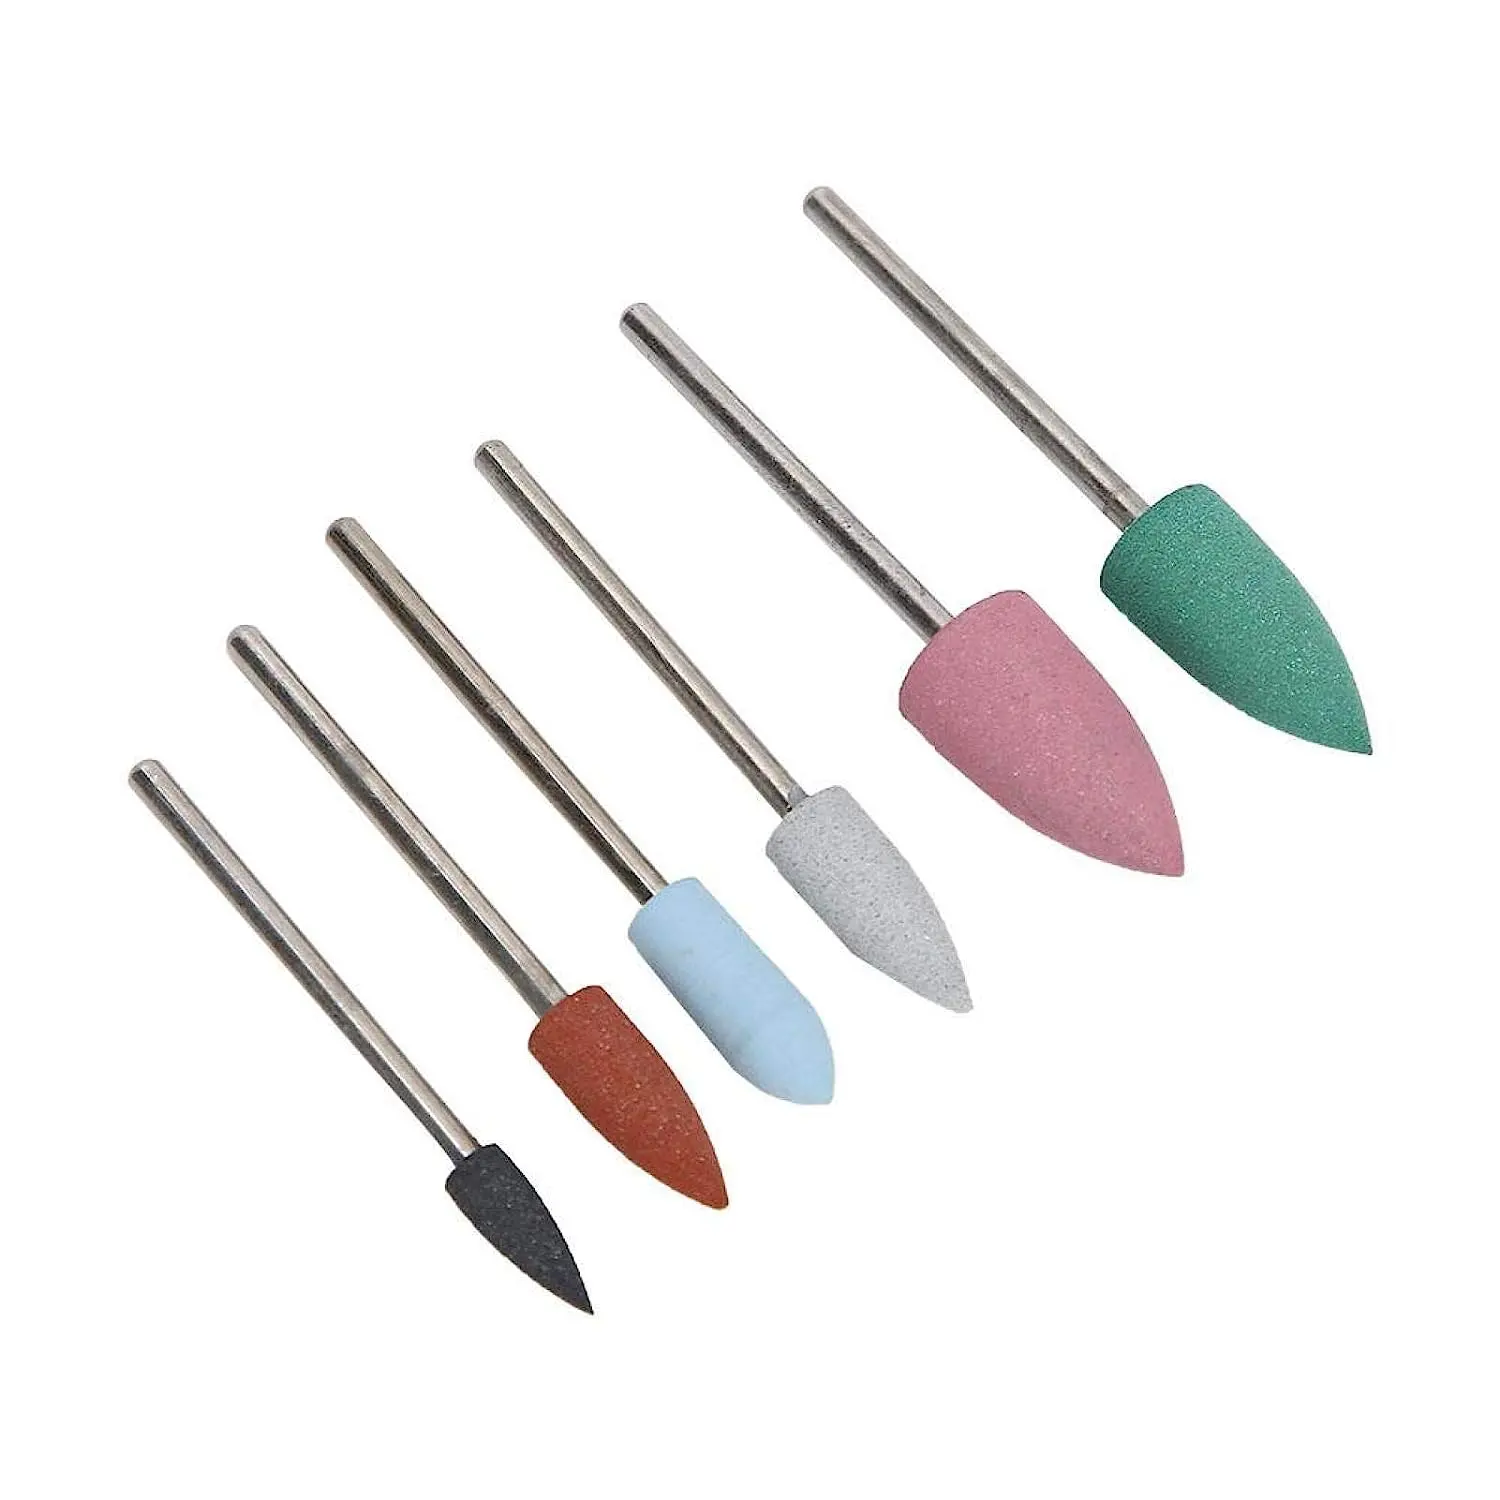 Pointed Tree Bullet Shape Dentist Teeth Silicone Rubber Polisher For Metals And Alloys